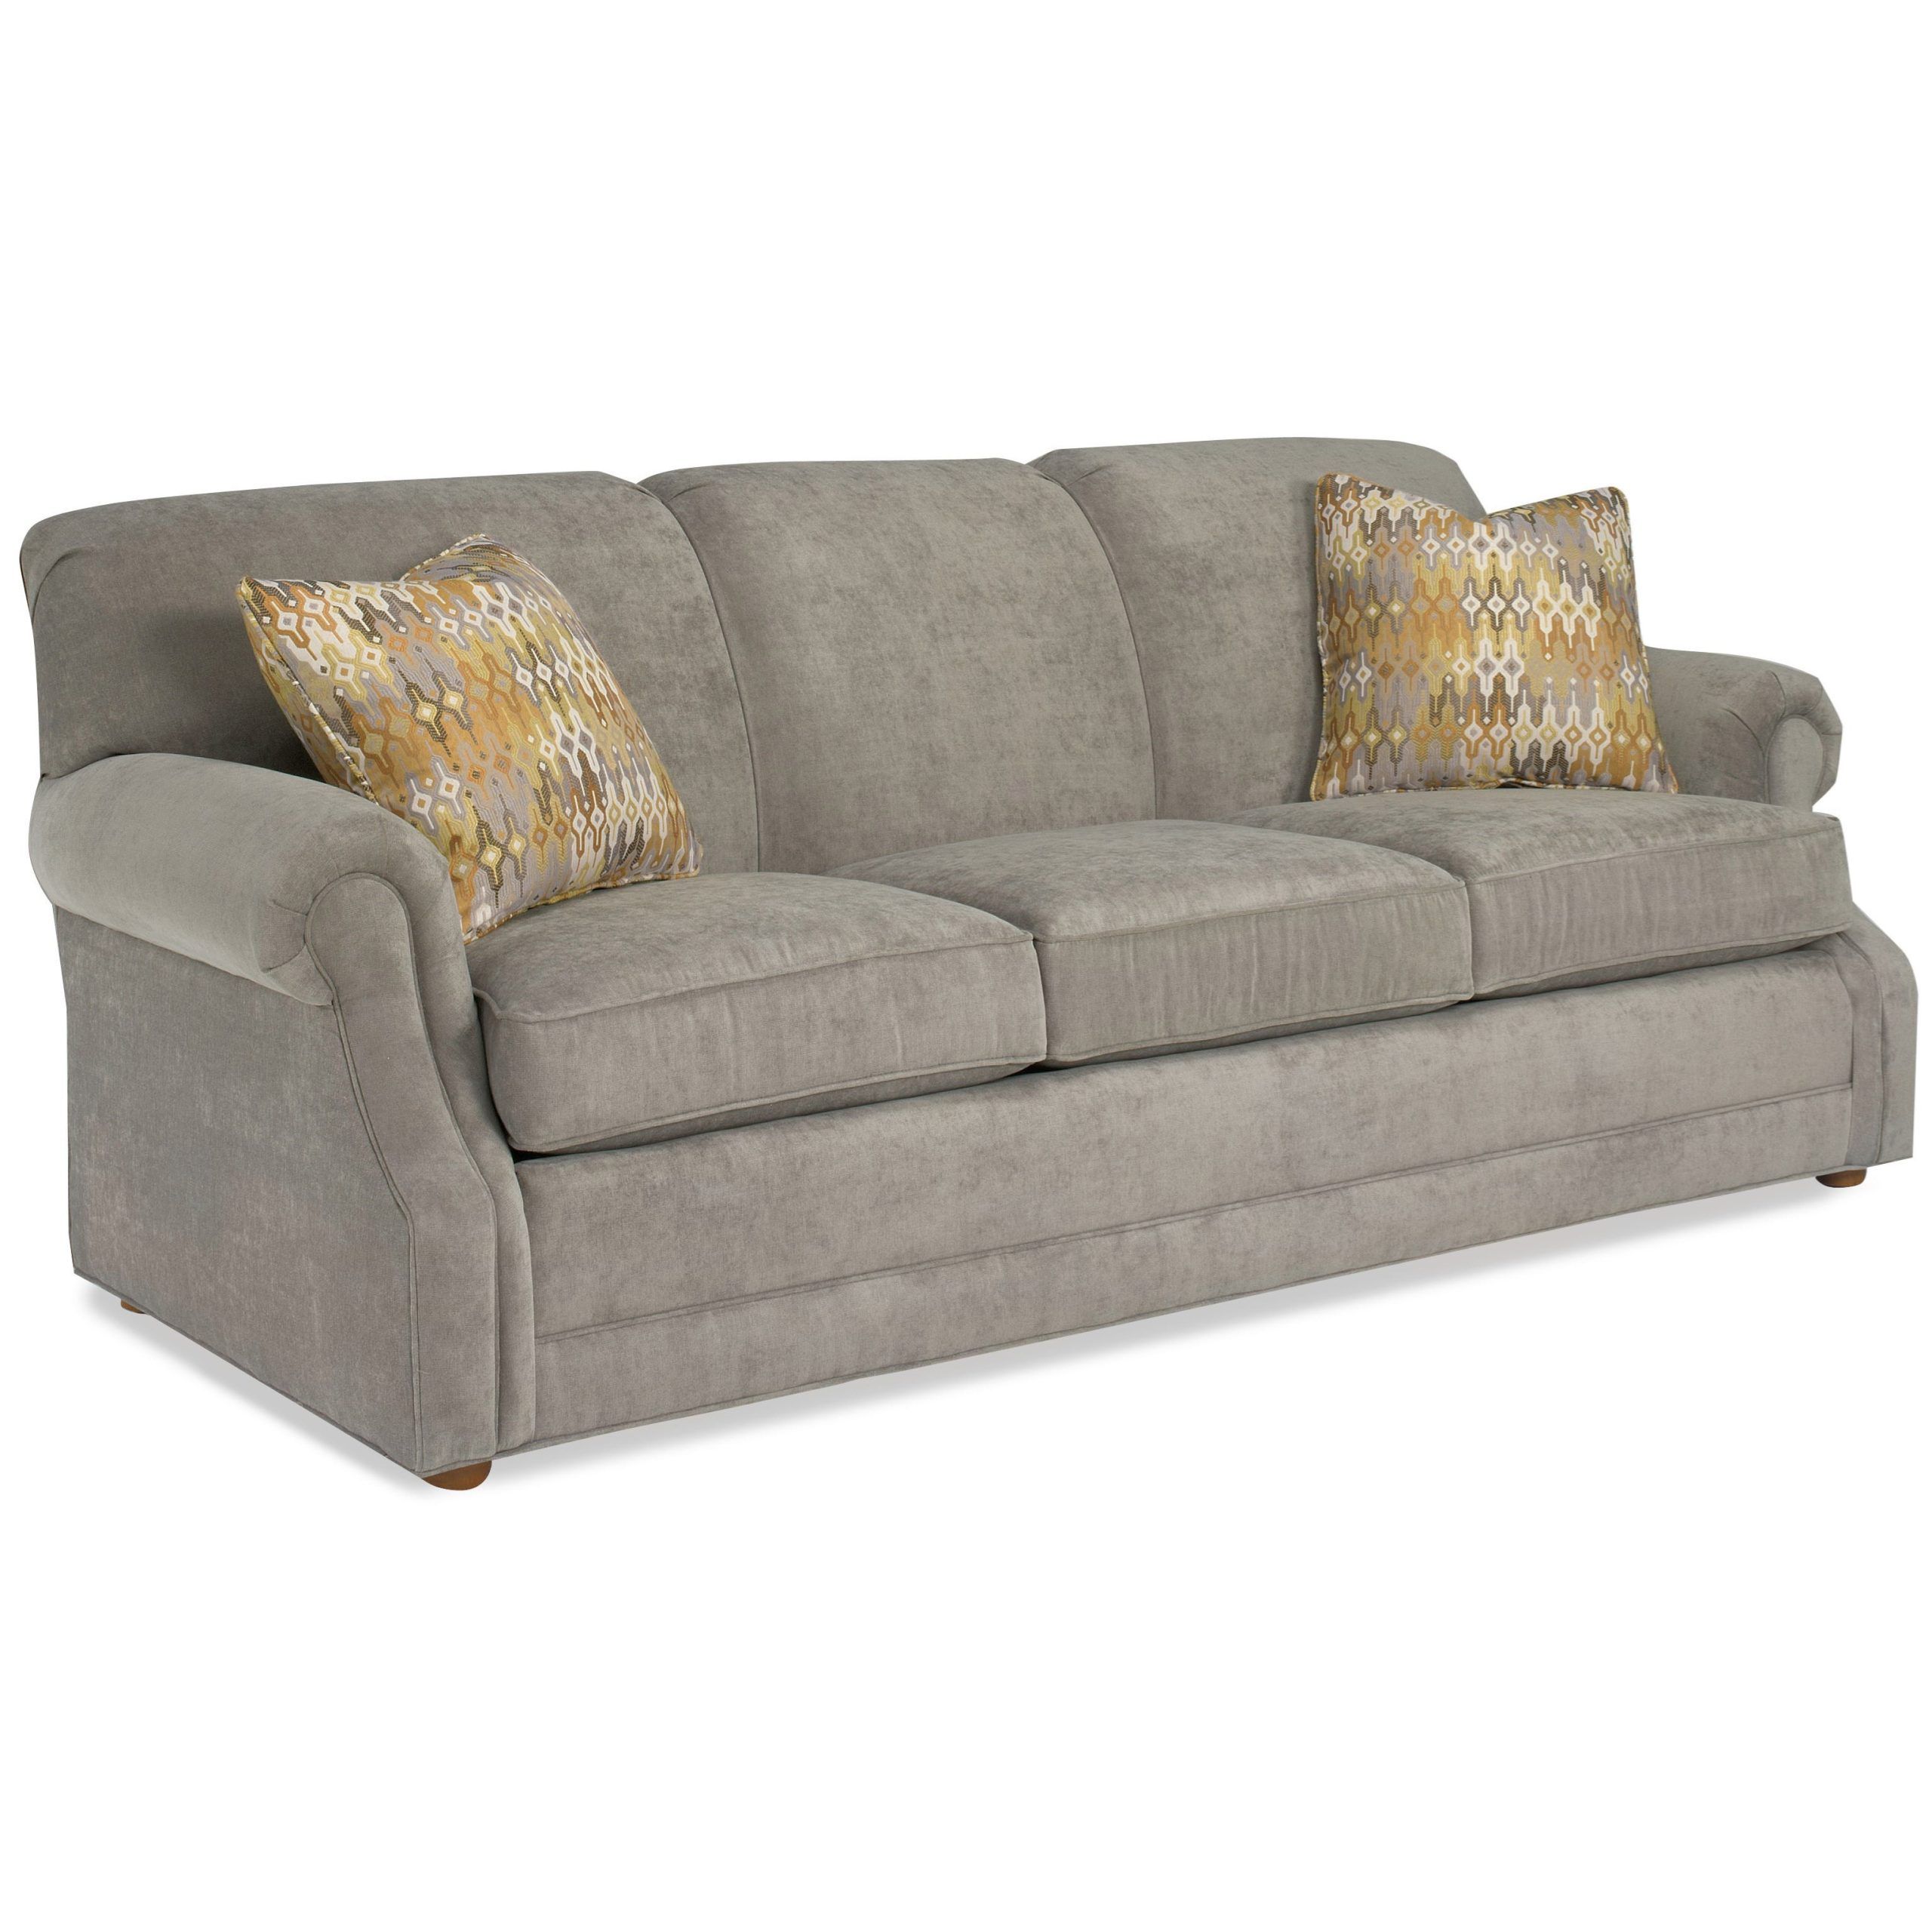 Temple Furniture Tailor Made 6630 85 Casual Sofa With Attached Back Pertaining To Sofas With Pillowback Wood Bases (Gallery 3 of 20)